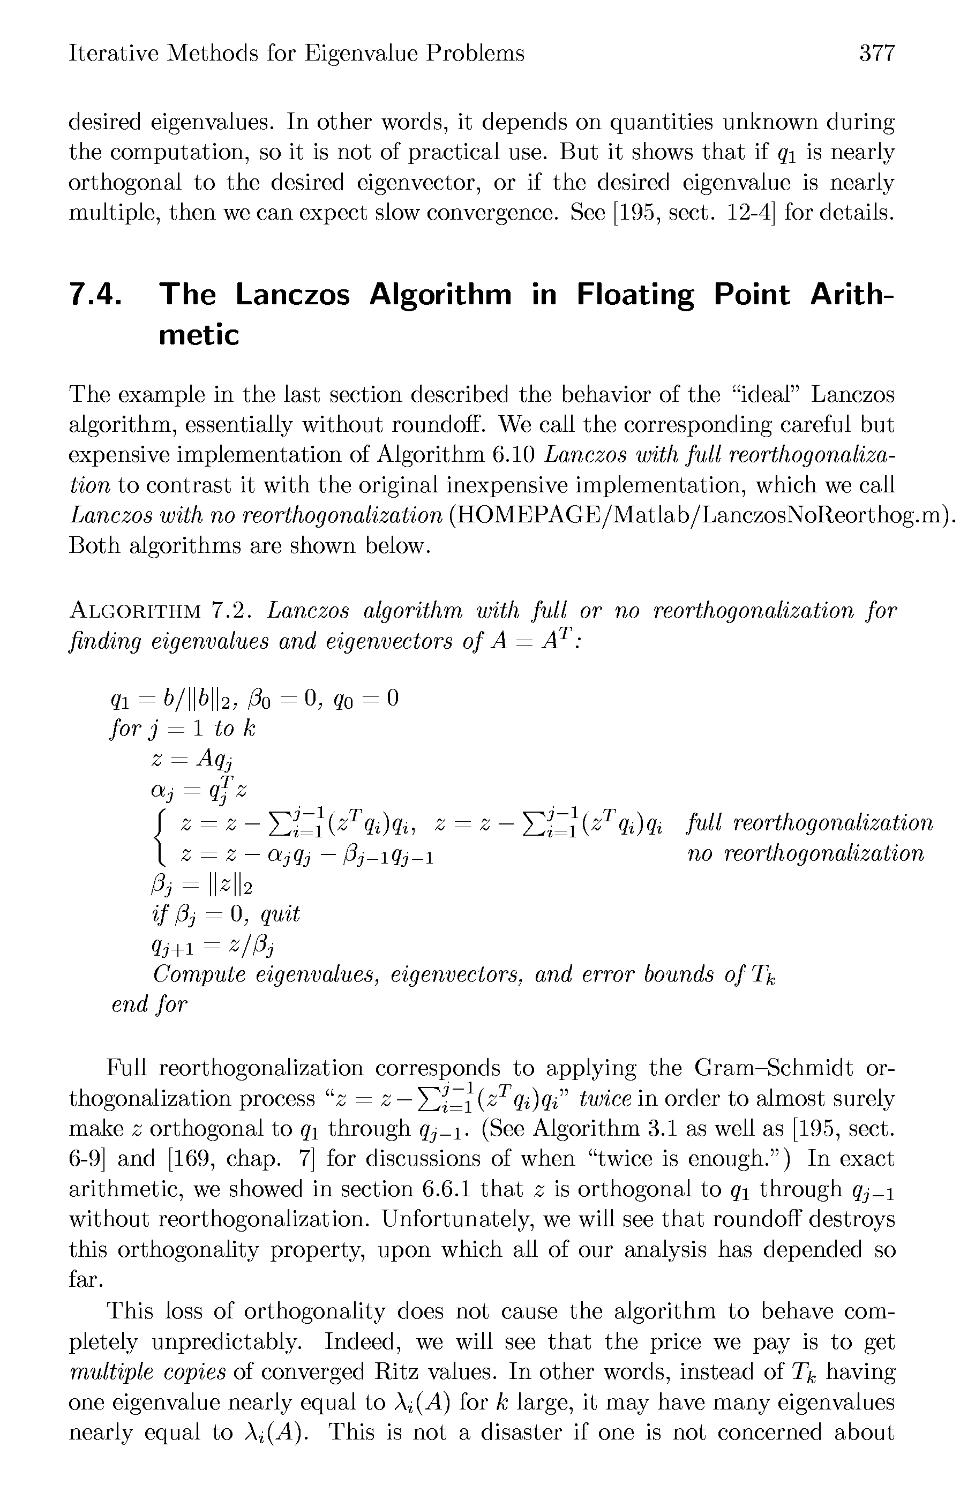 7.4 The Lanczos Algorithm in Floating Point Arithmetic